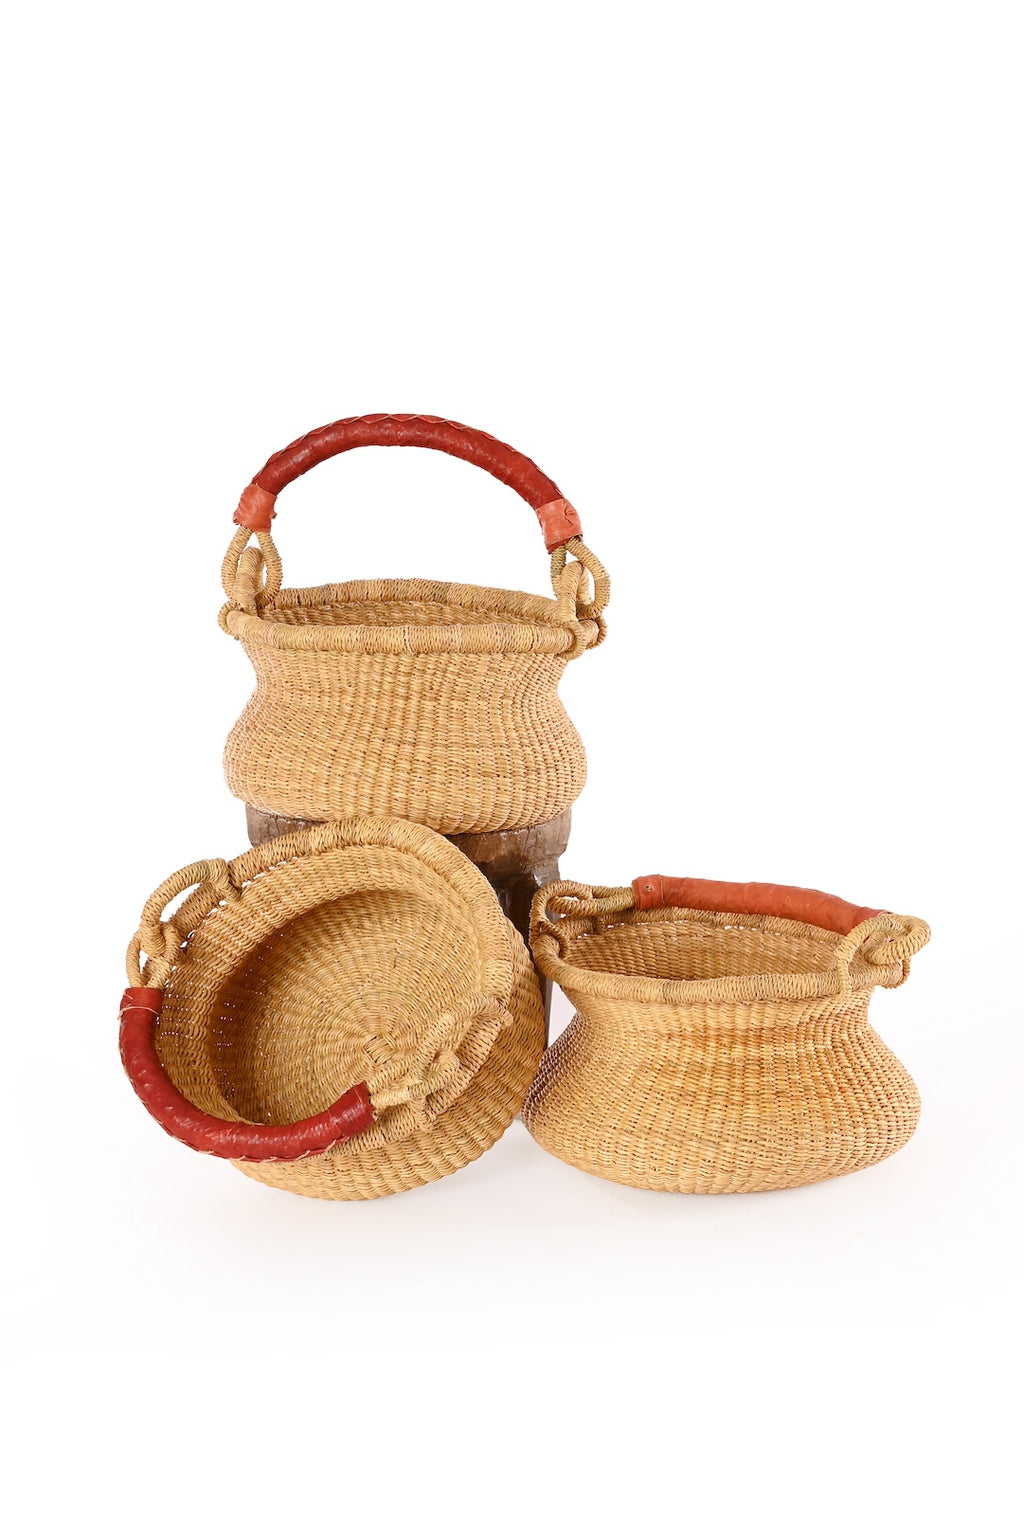 Petite Natural Swing Basket with Brown Leather Handle